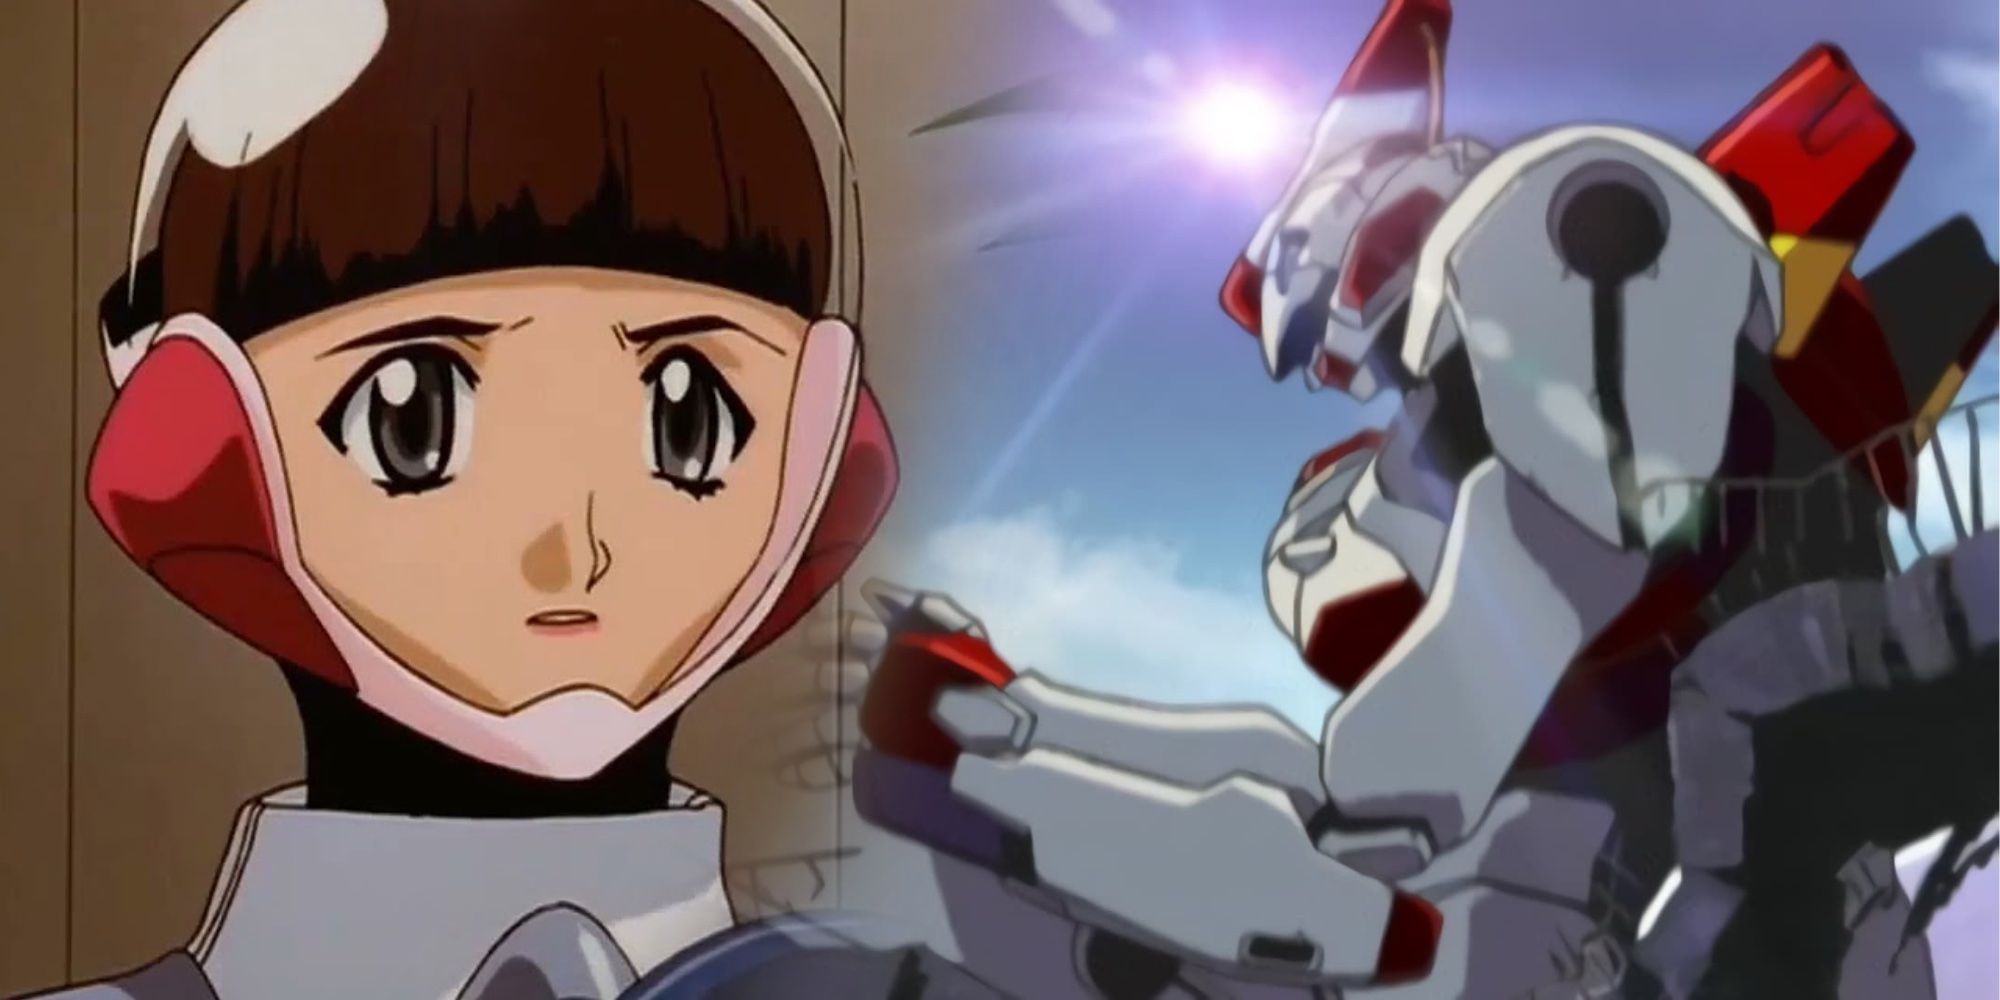 Mitsuki wearing her suit on the left, and her mecha on the right